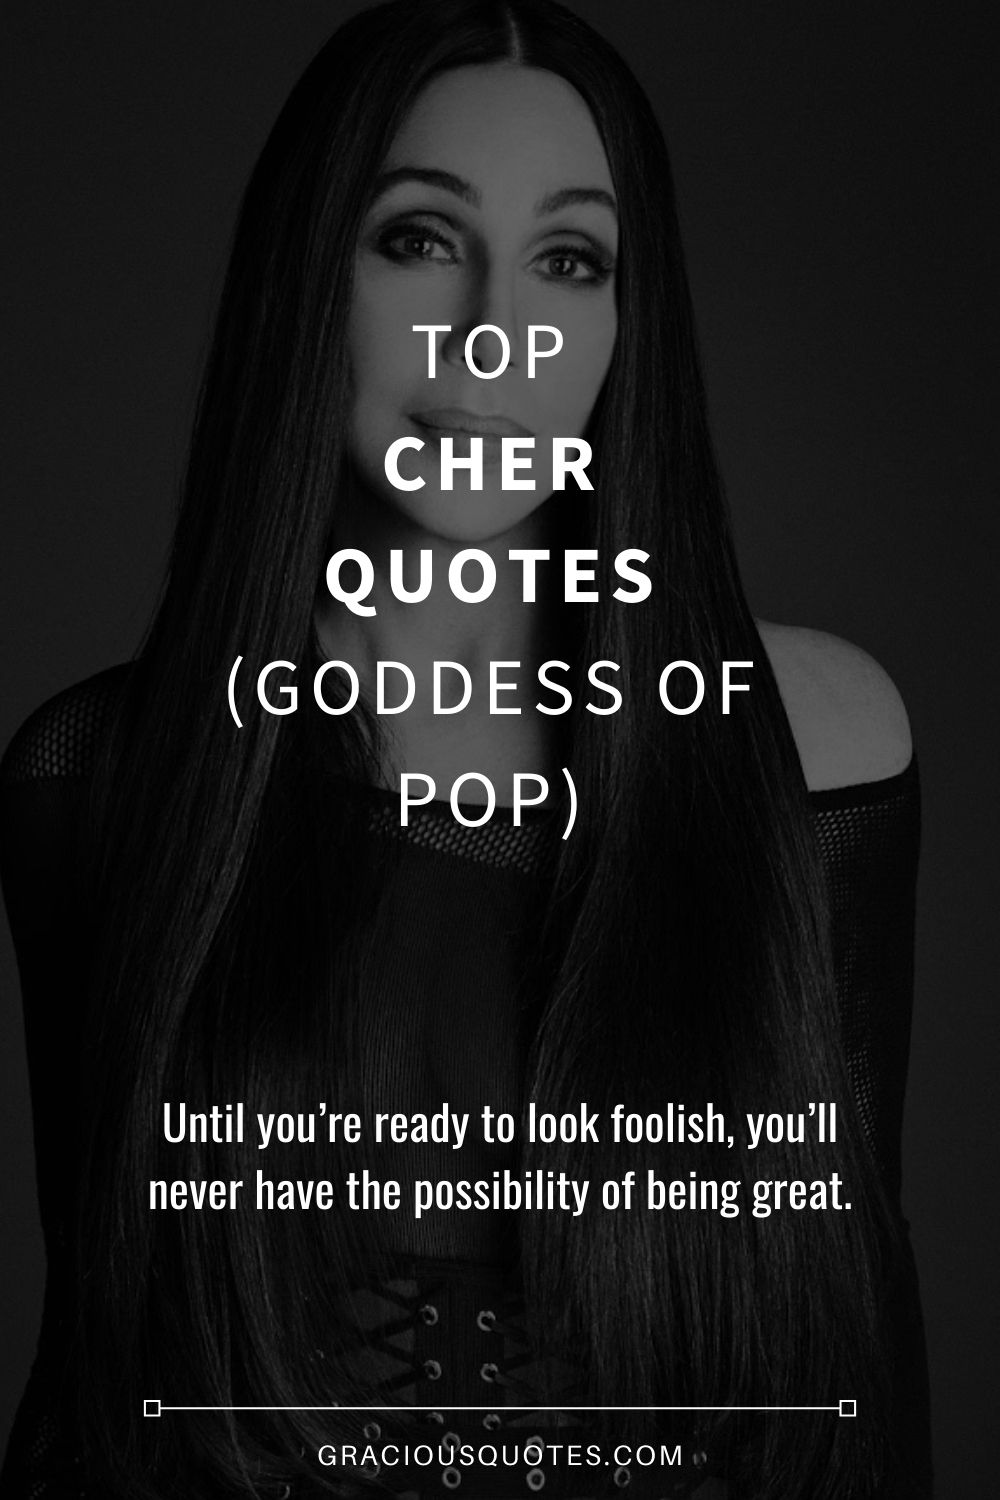 Cher Quote: “Life is about enjoying yourself and having a good time.”